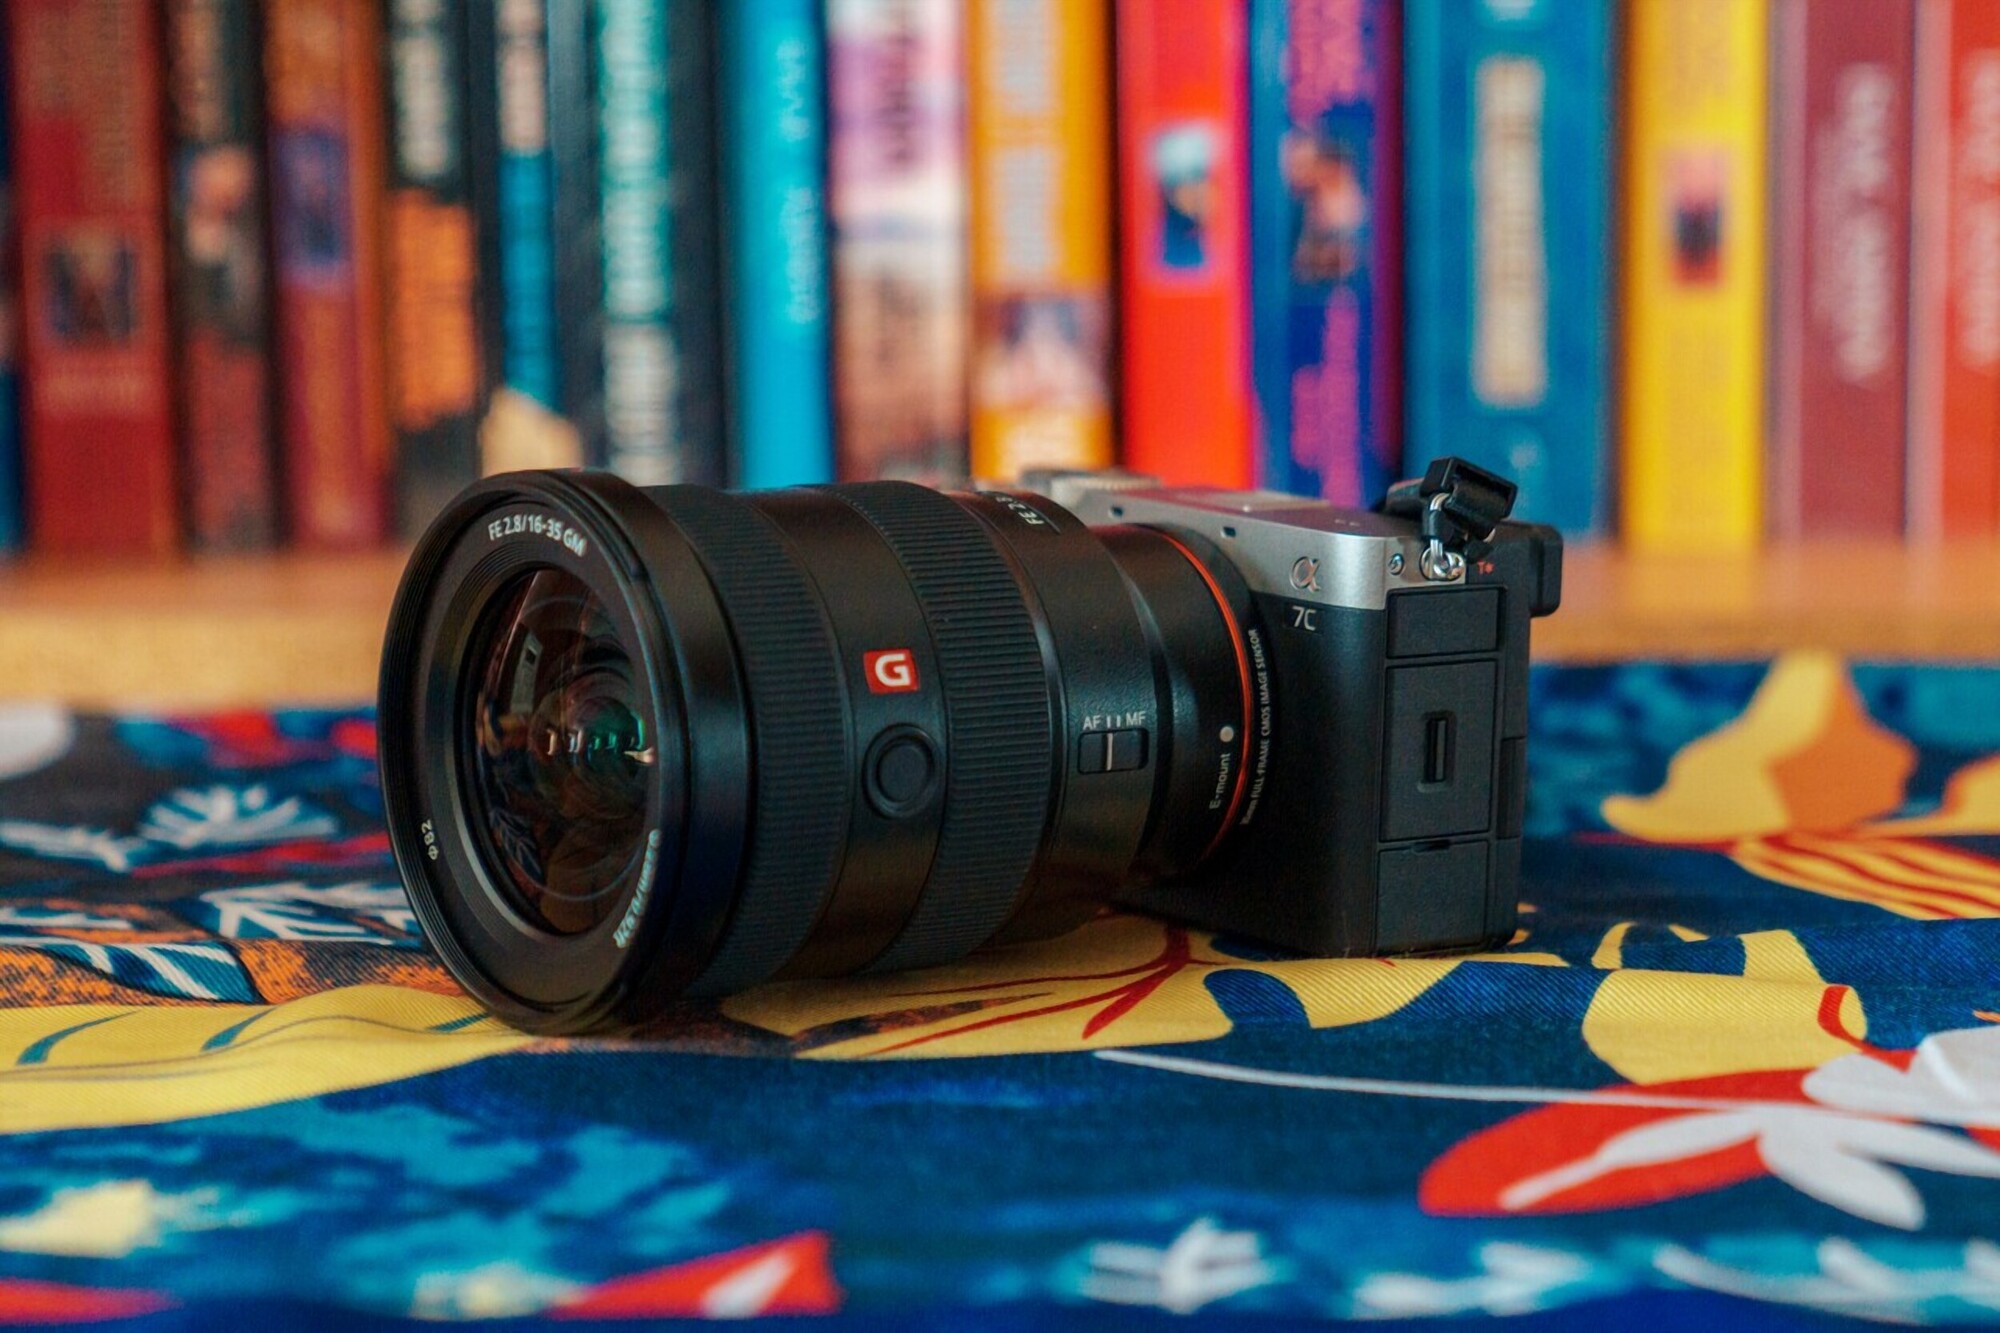 Sony A7iii Mini-Review - Finding the Darkside - 35mmc